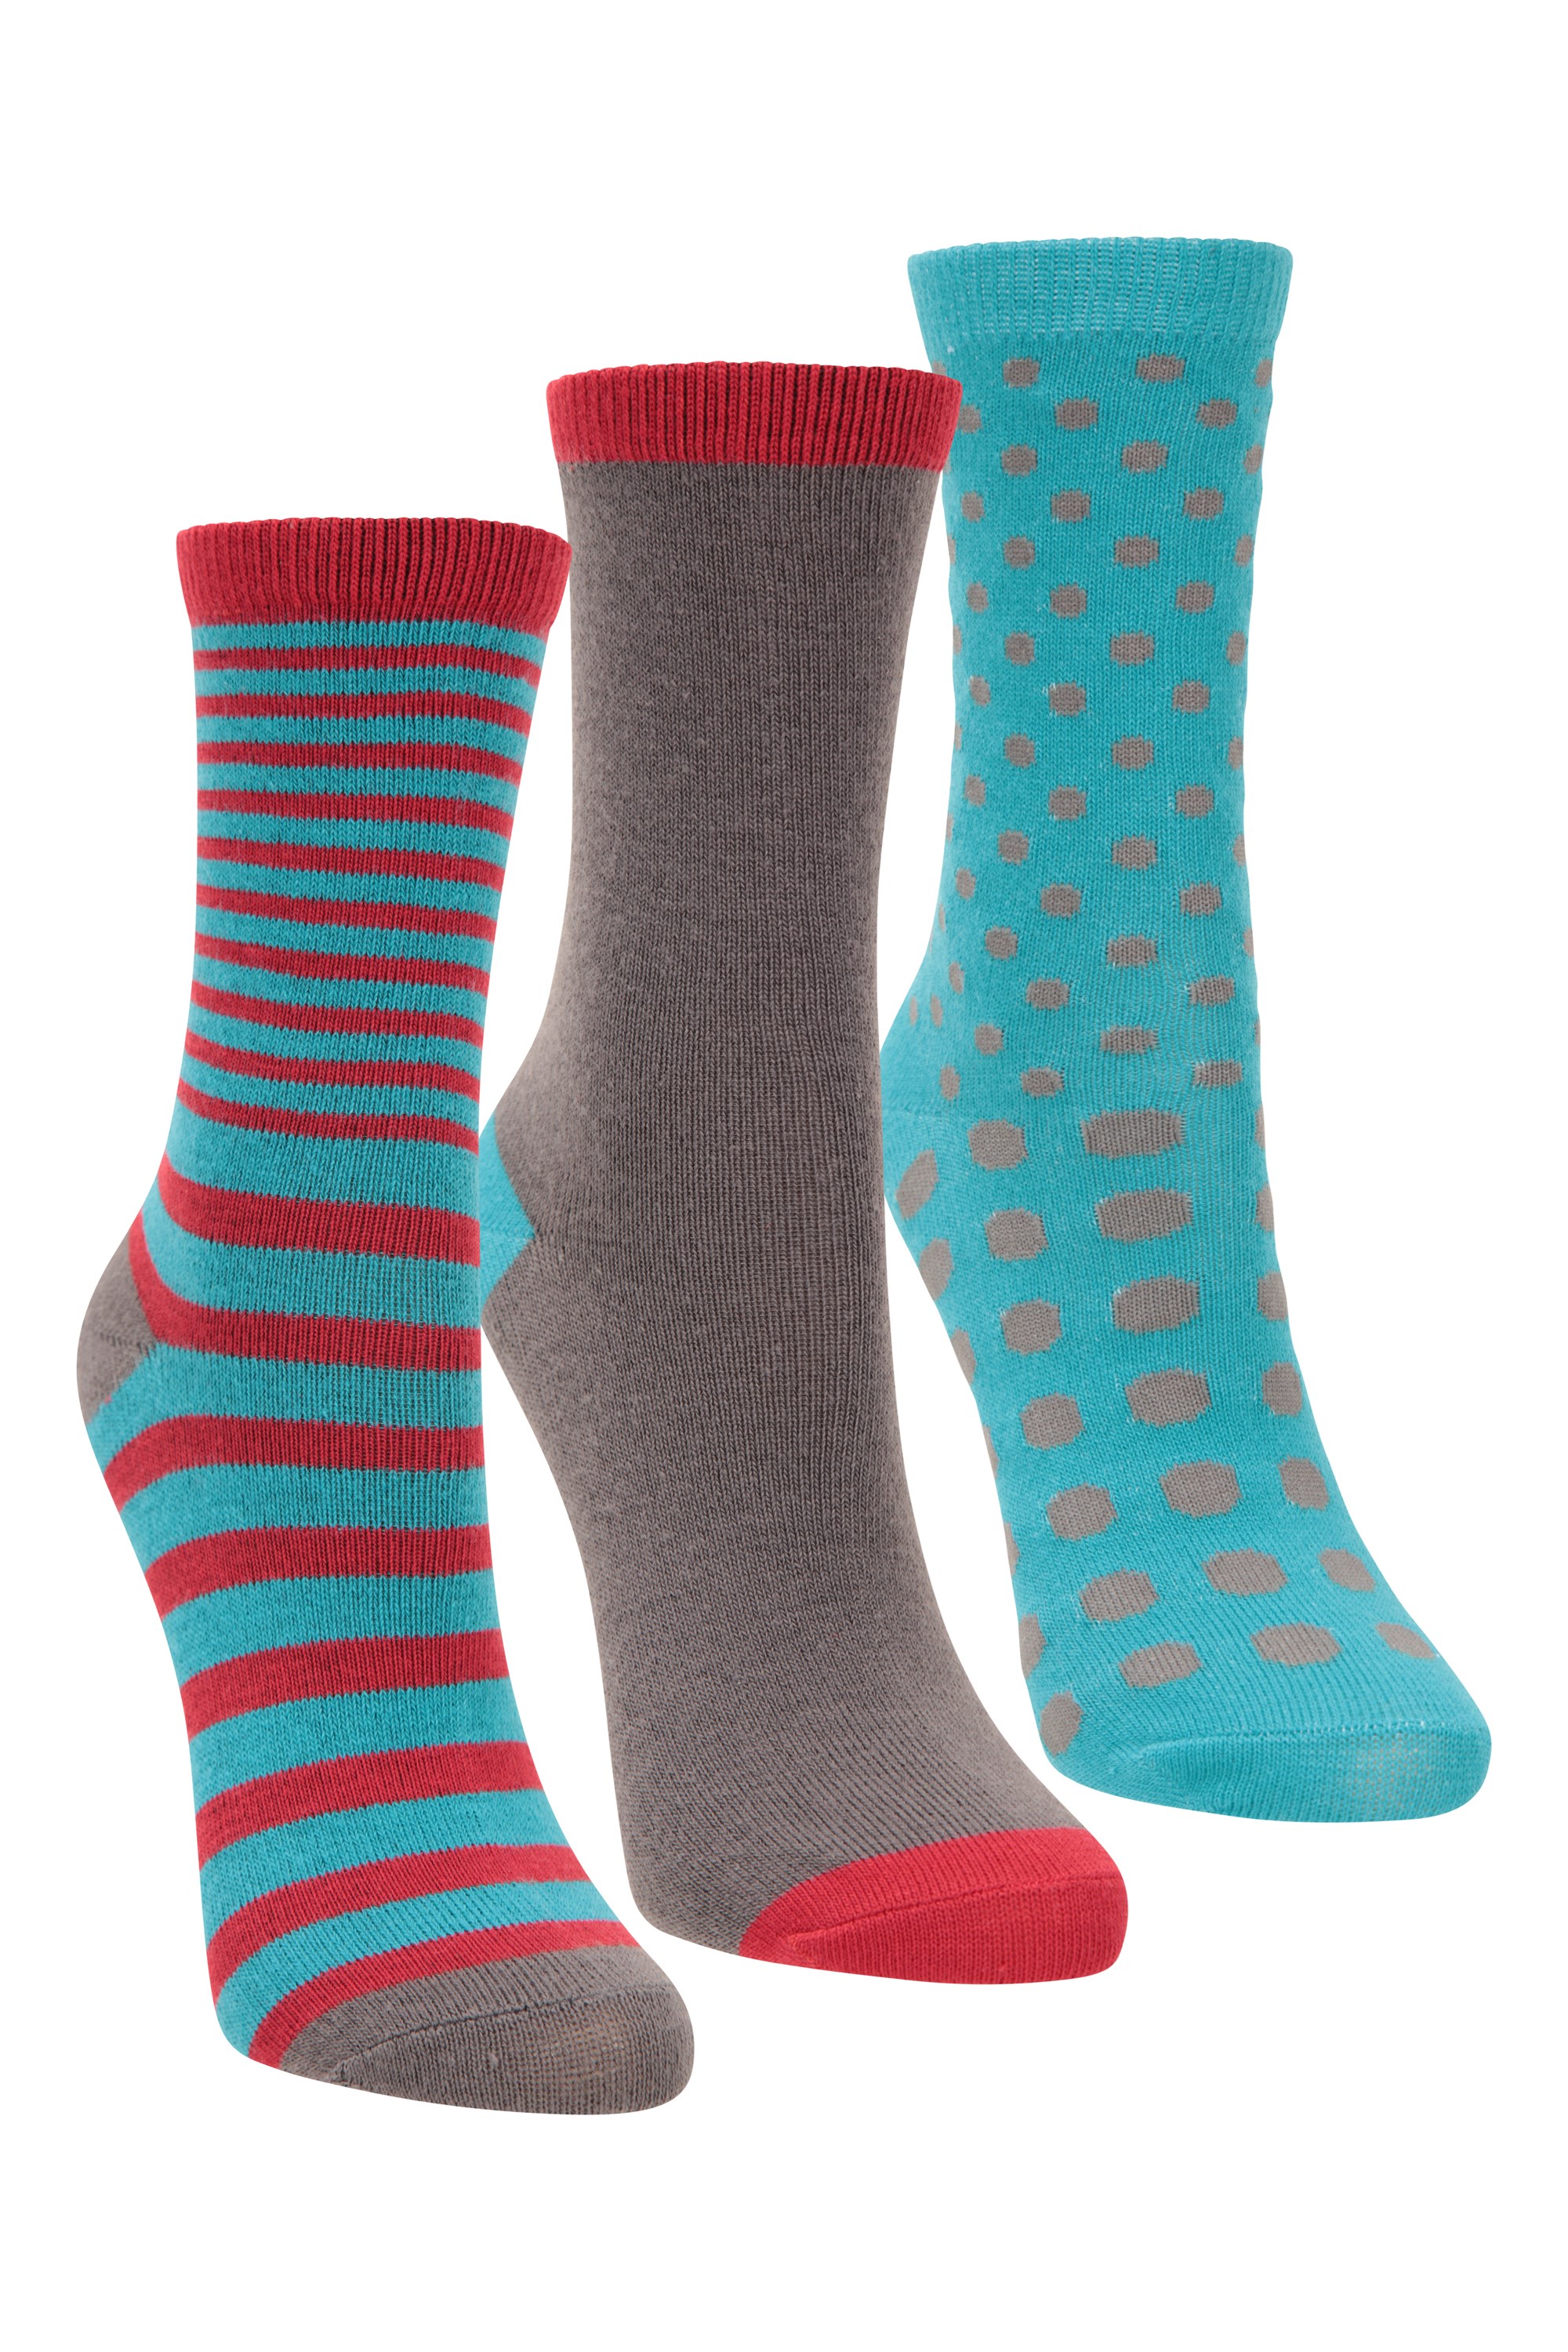 Kids Spots and Stripes Recycled Socks - Blue